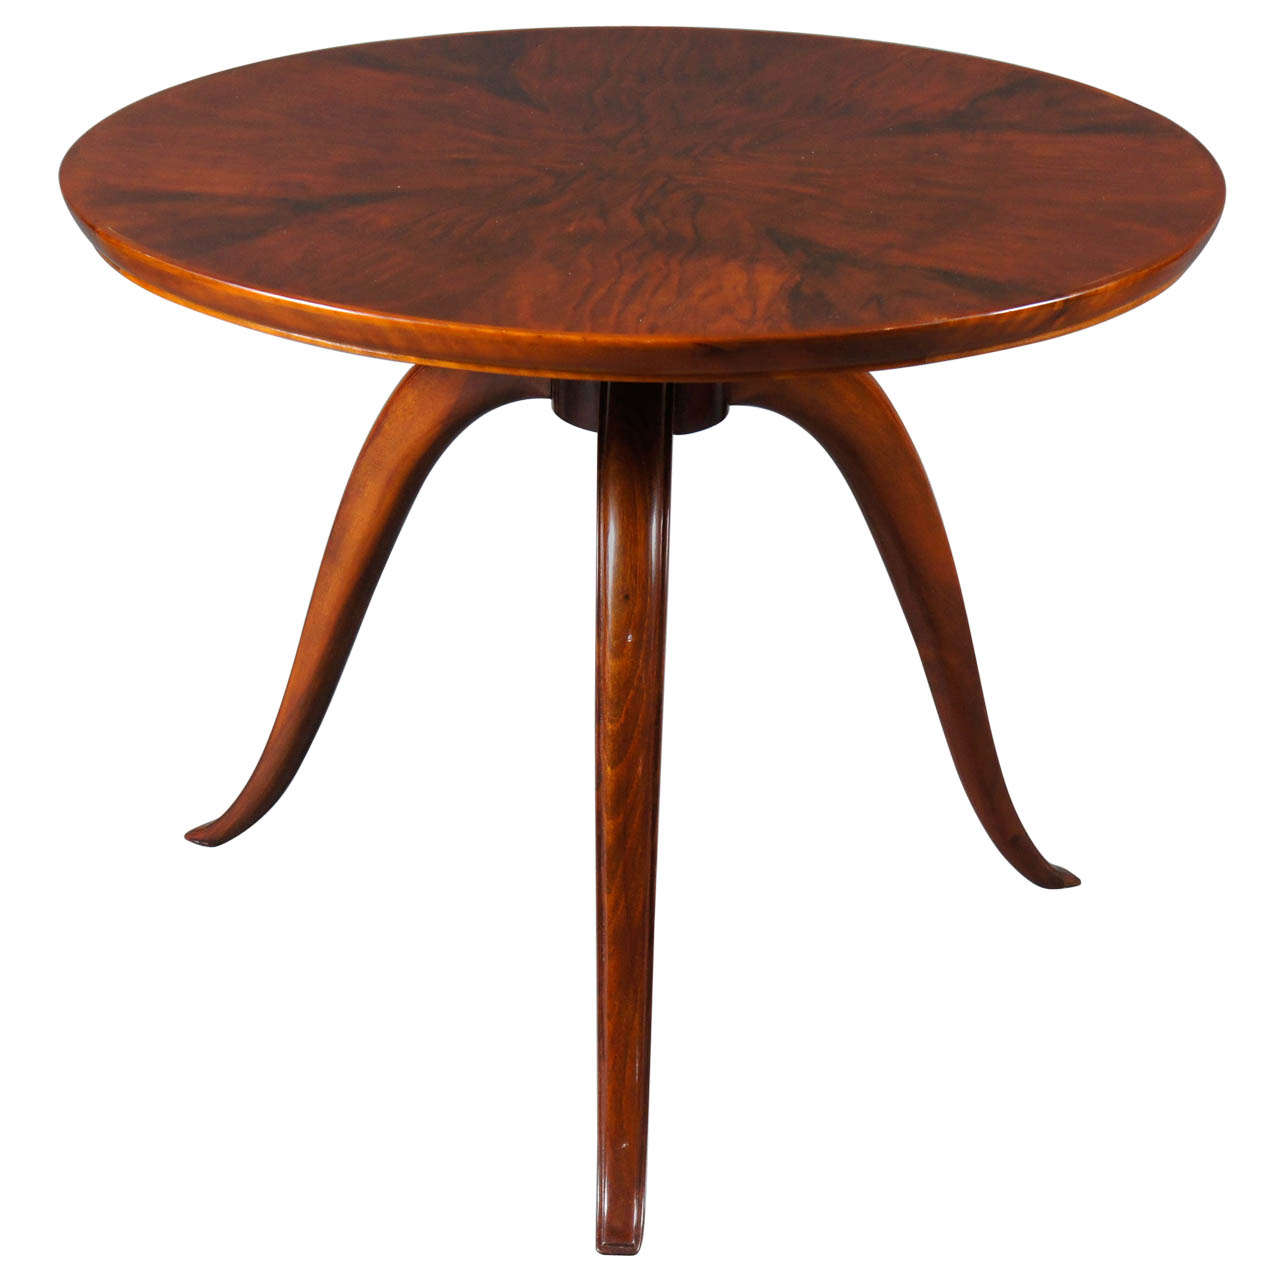 1930's French Walnut Table at 1stdibs